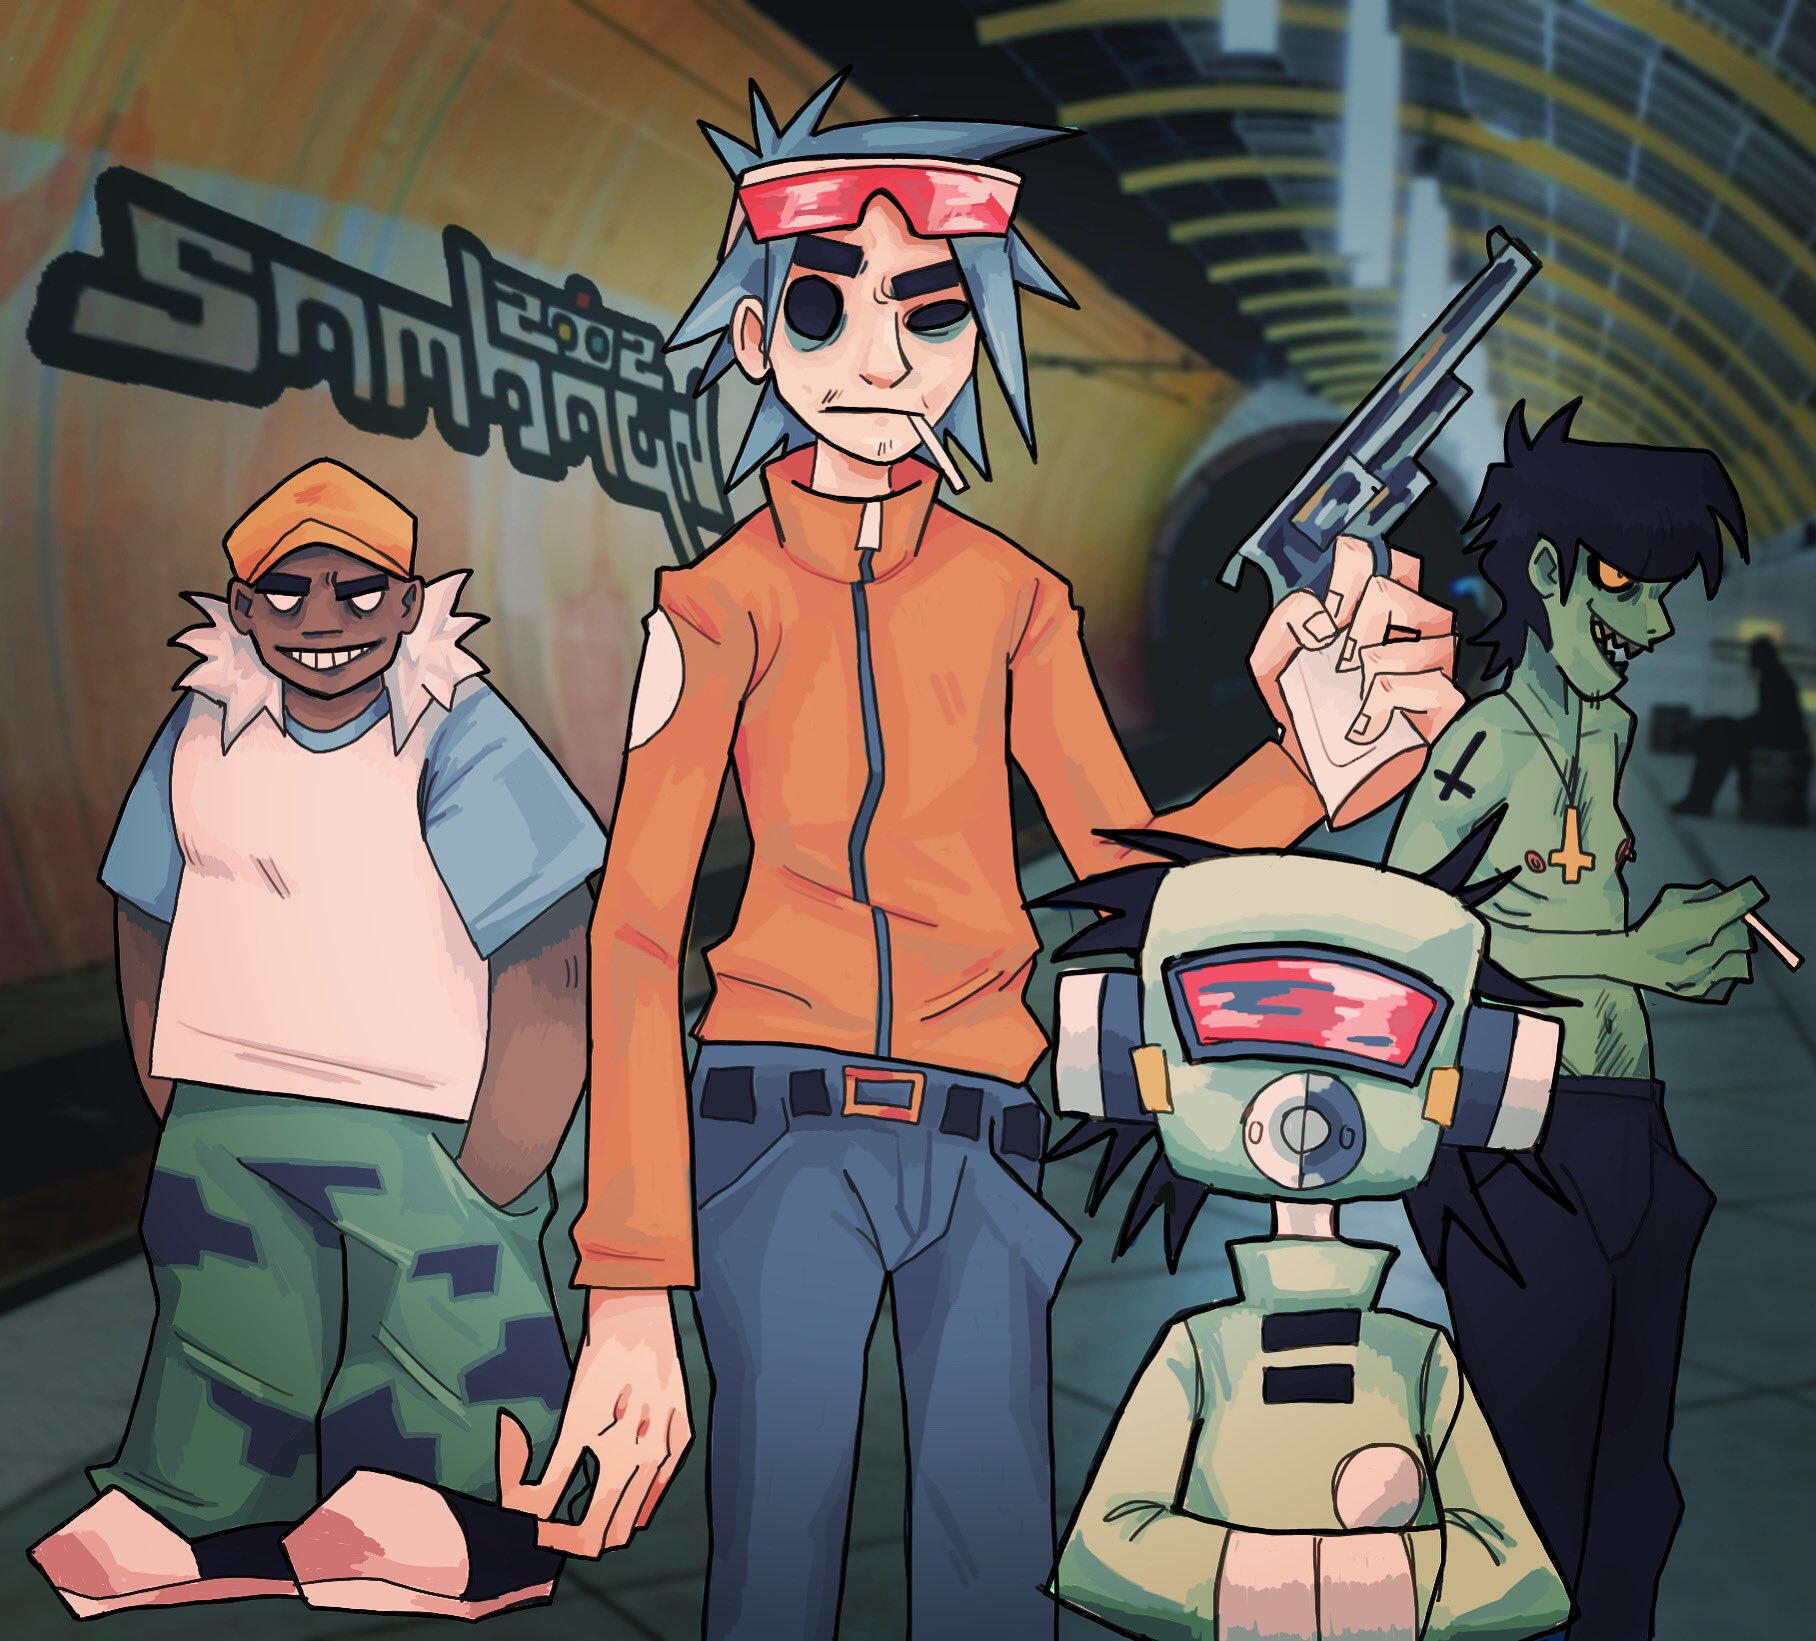 A digital painting of the band 'Gorillaz', done in 2021.